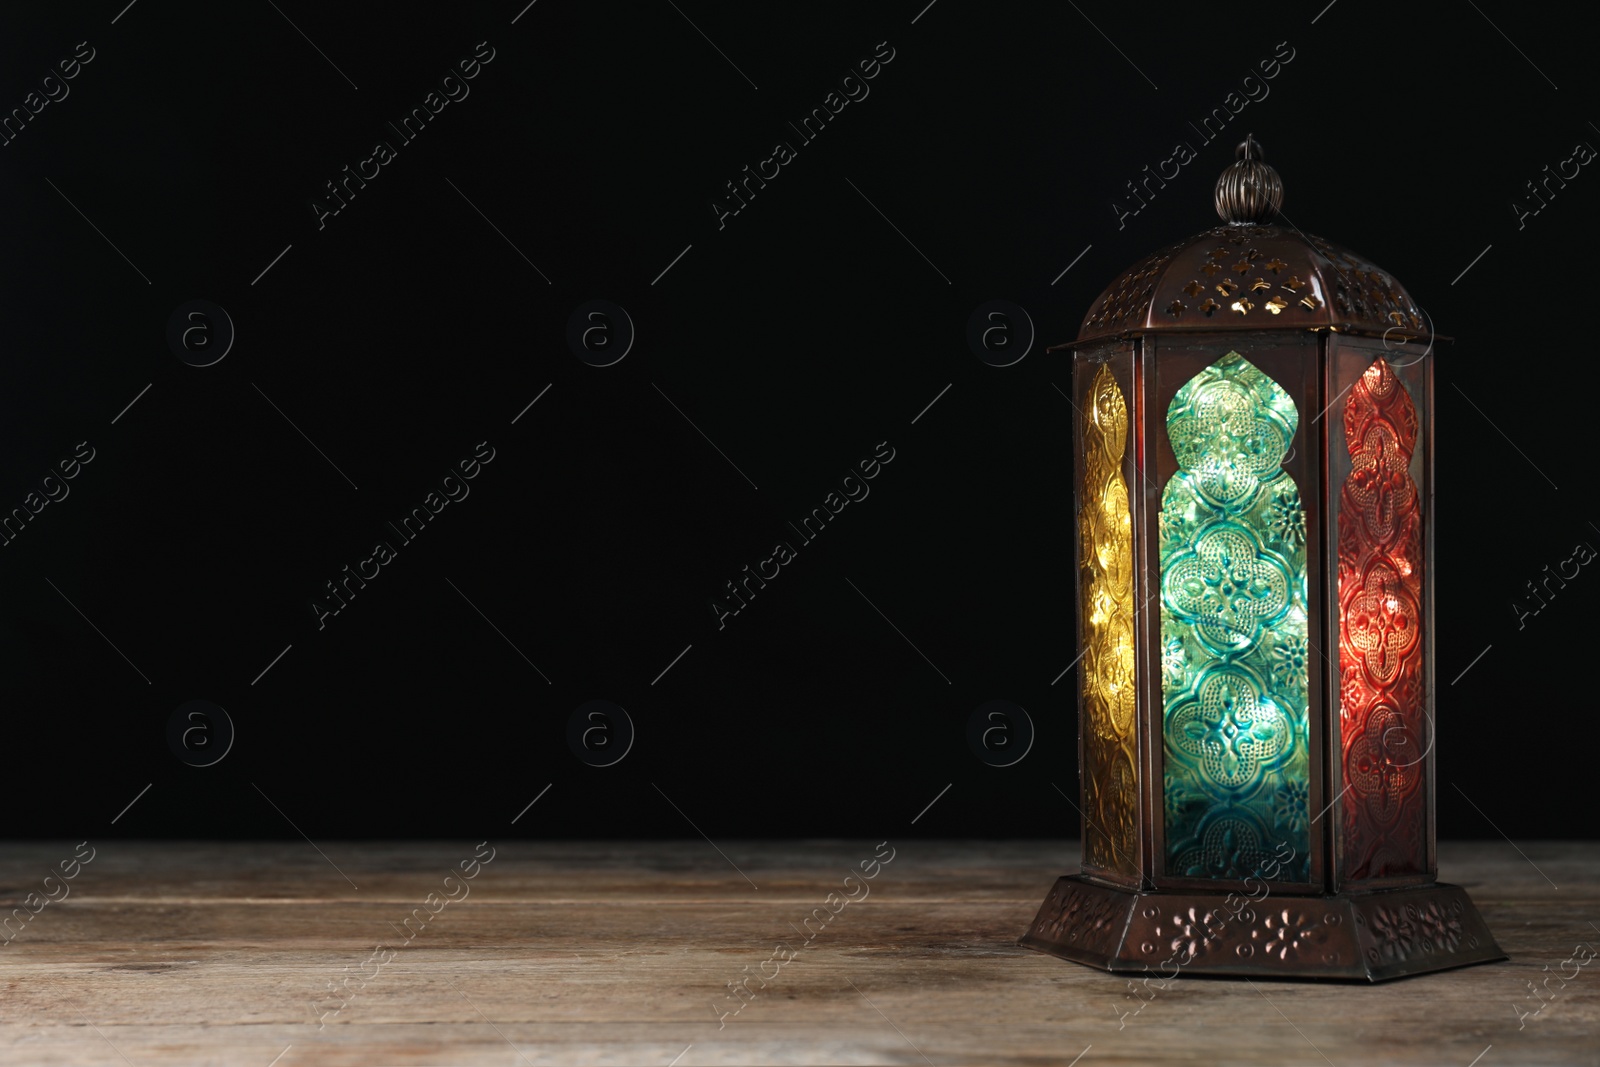 Photo of Decorative Arabic lantern on wooden table against black background, space for text